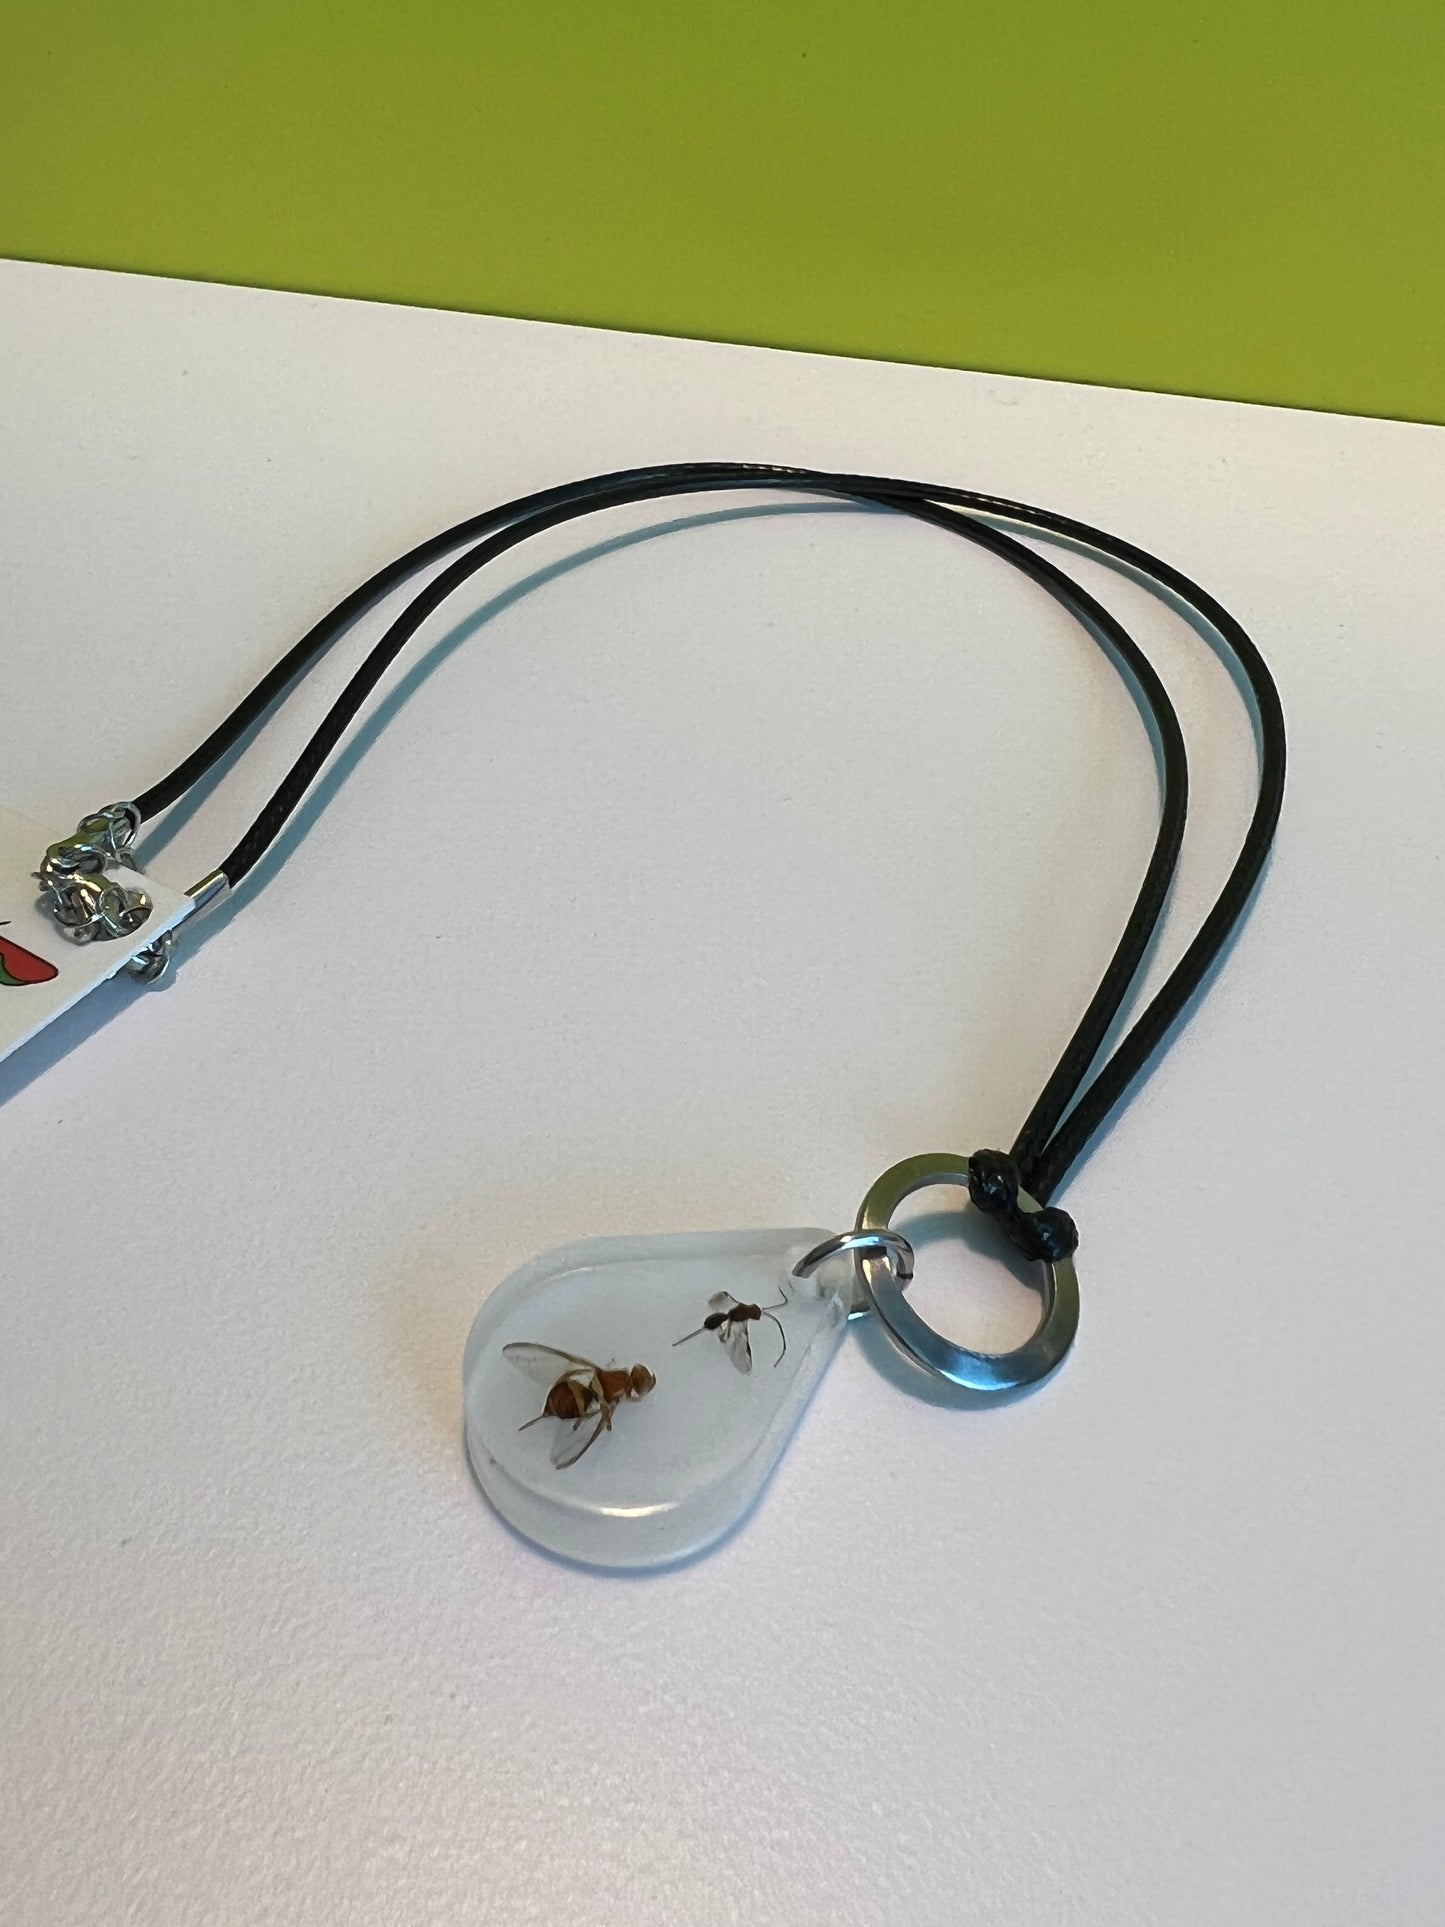 QLD Fly and parasitoid necklace